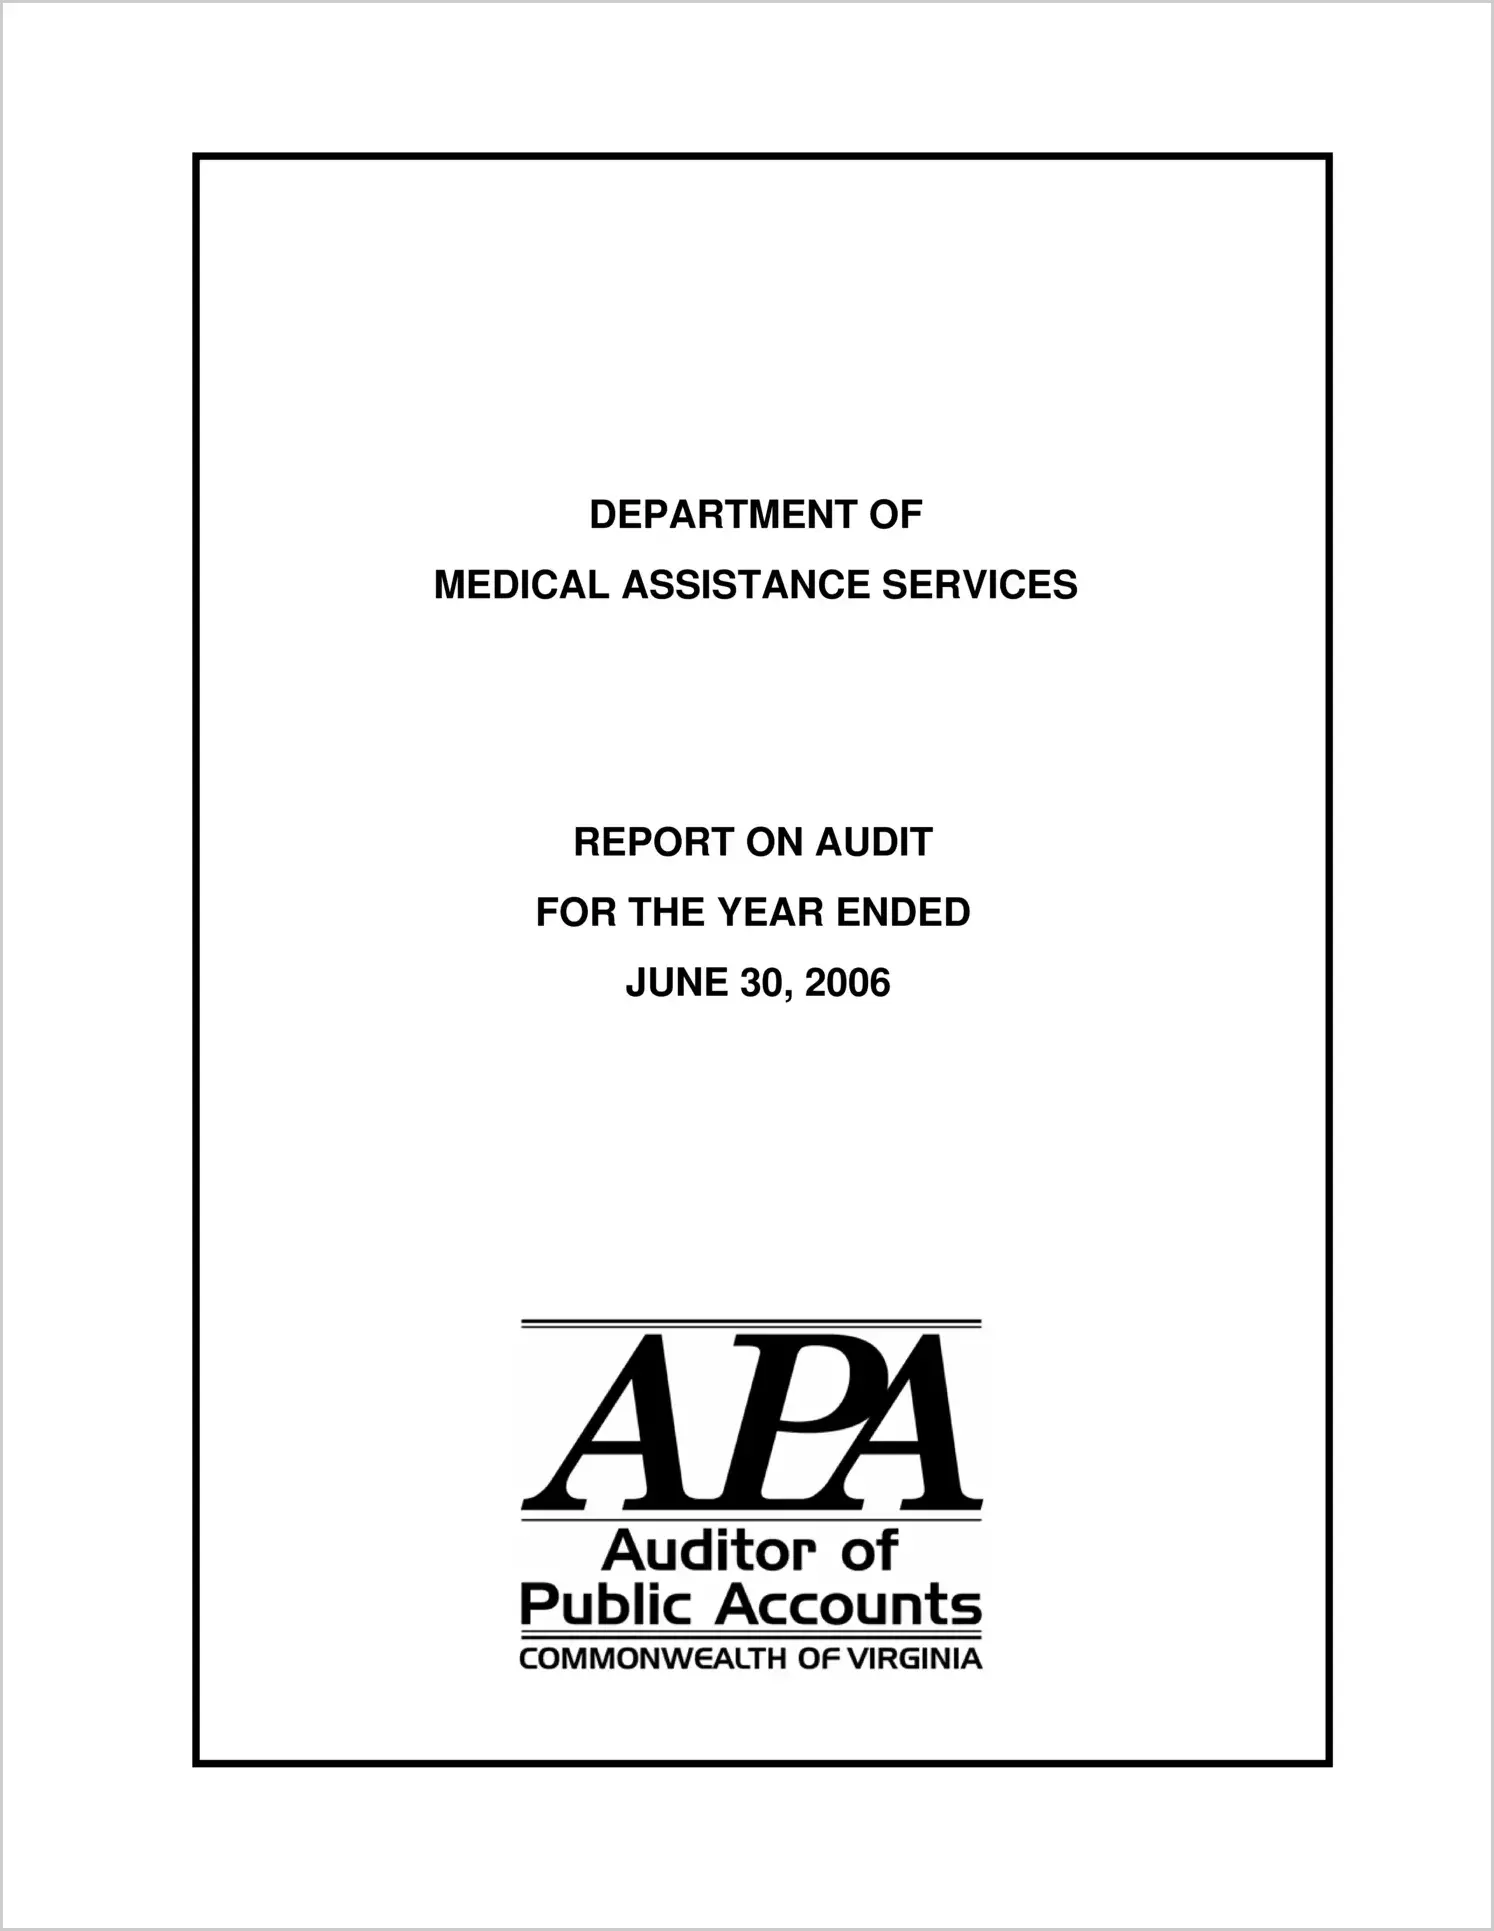 Department of Medical Assistance Services for the year ended June 30, 2006